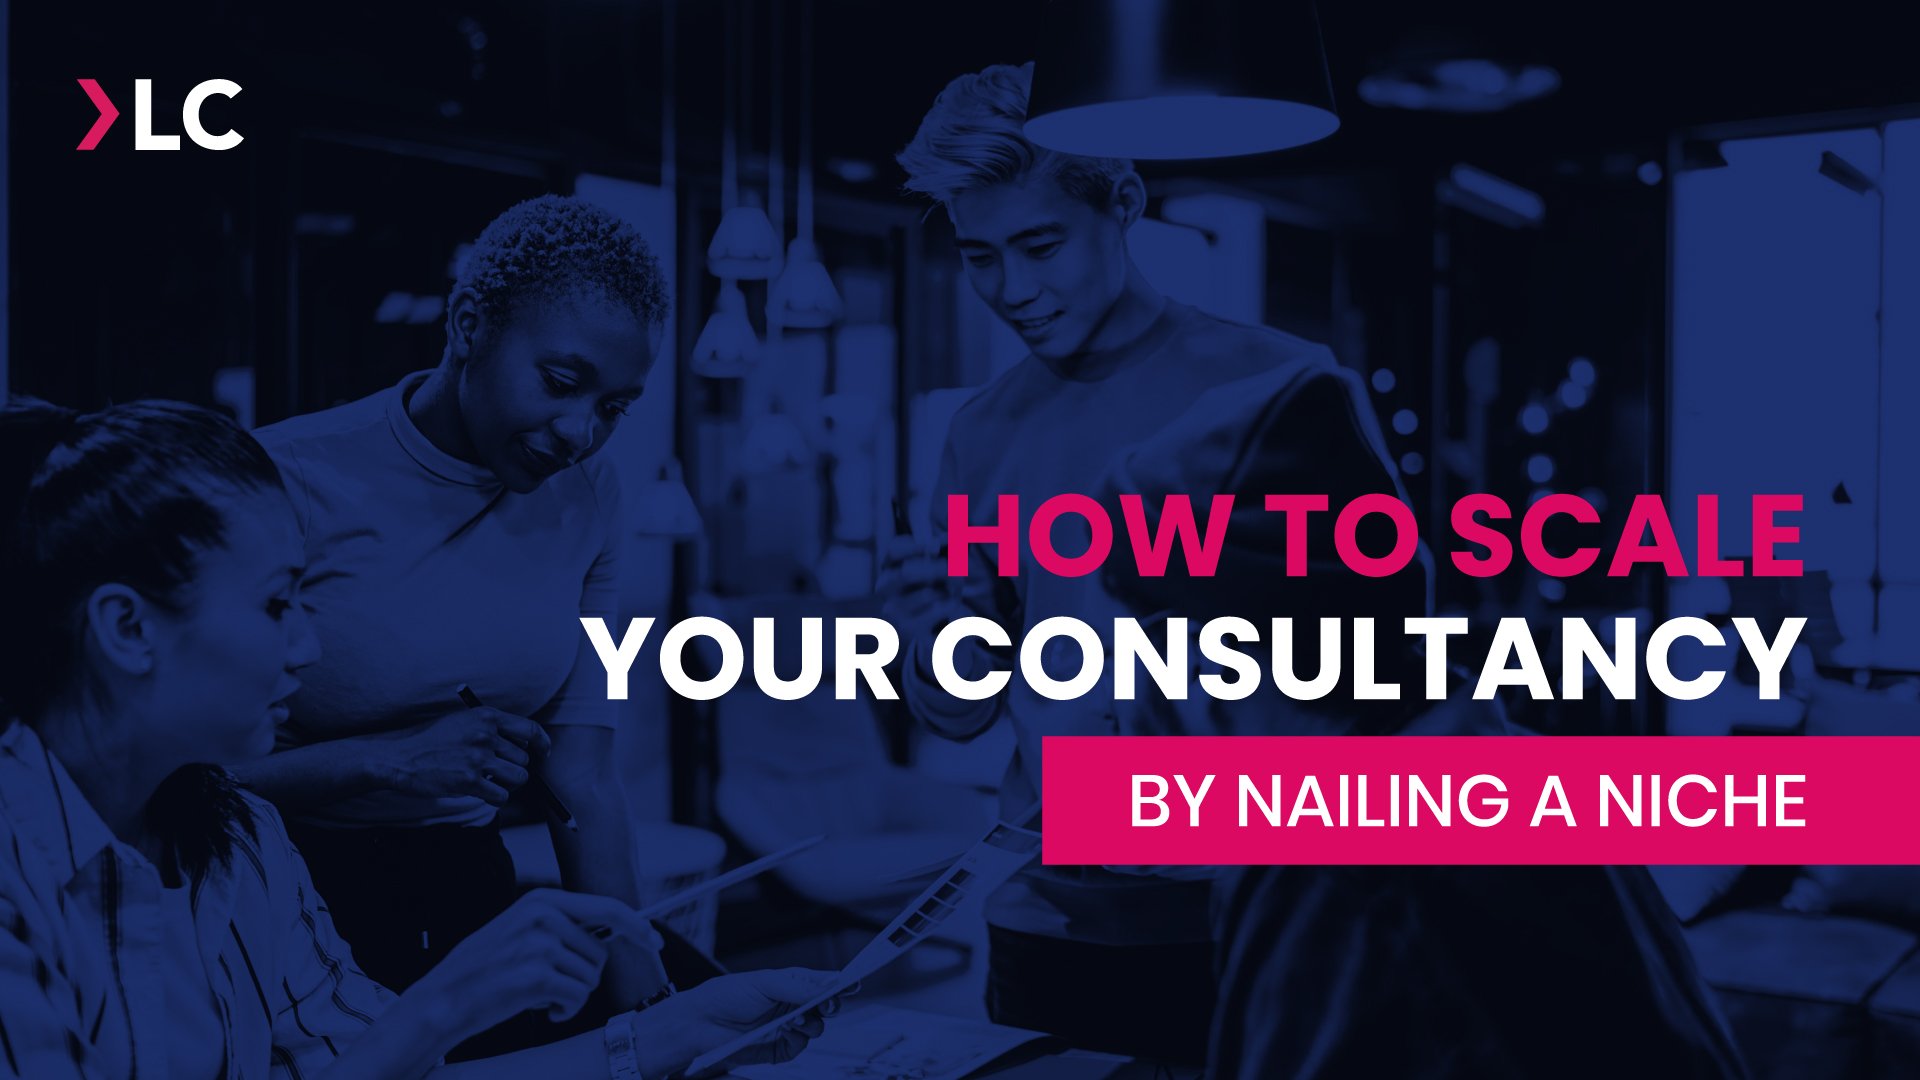 How to scale your consultancy by nailing a niche | Blog feature image